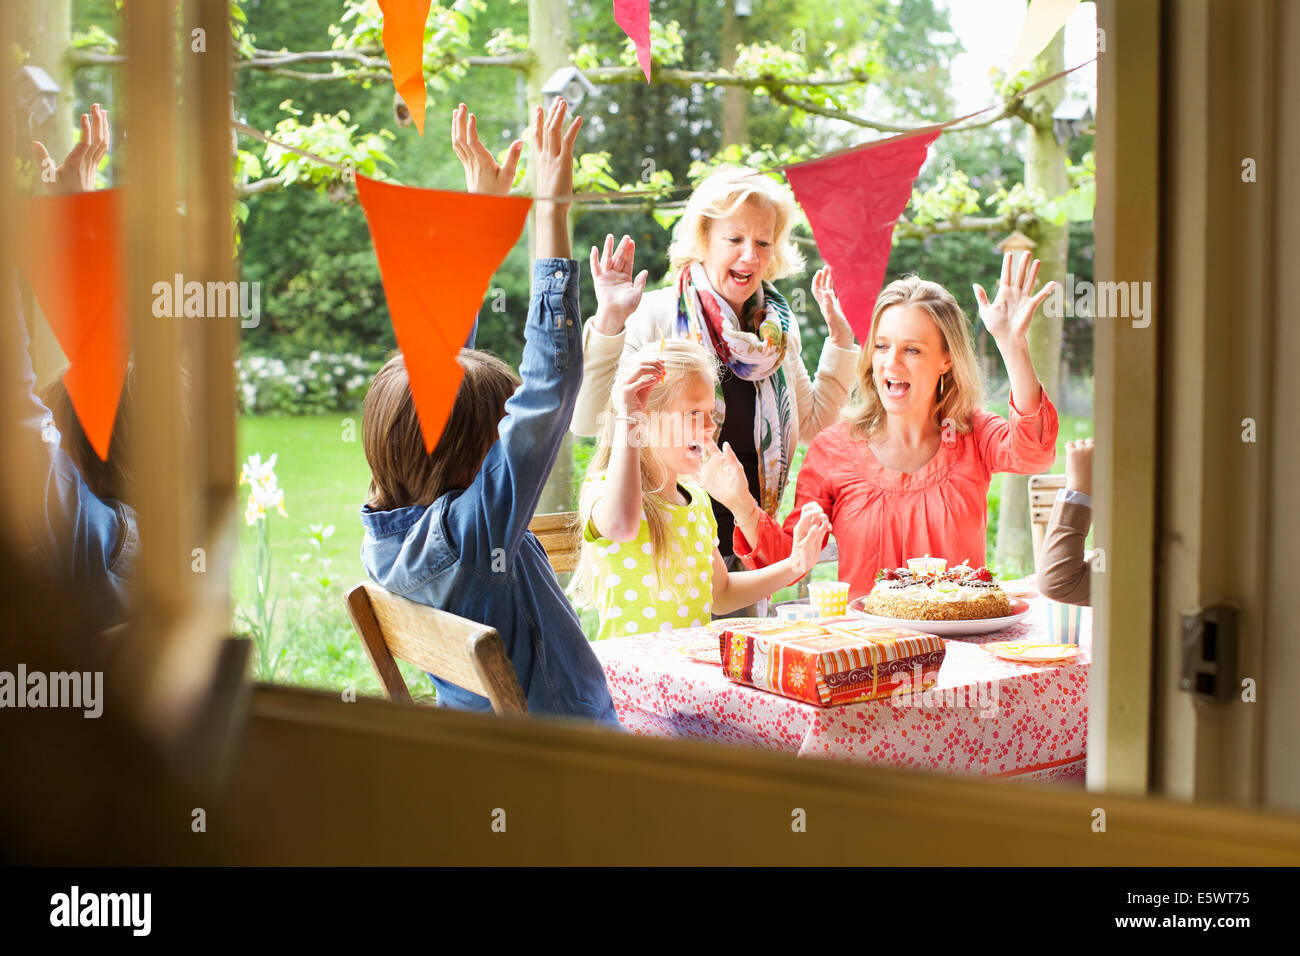 Family singing and cheering at birthday party Stock Photo